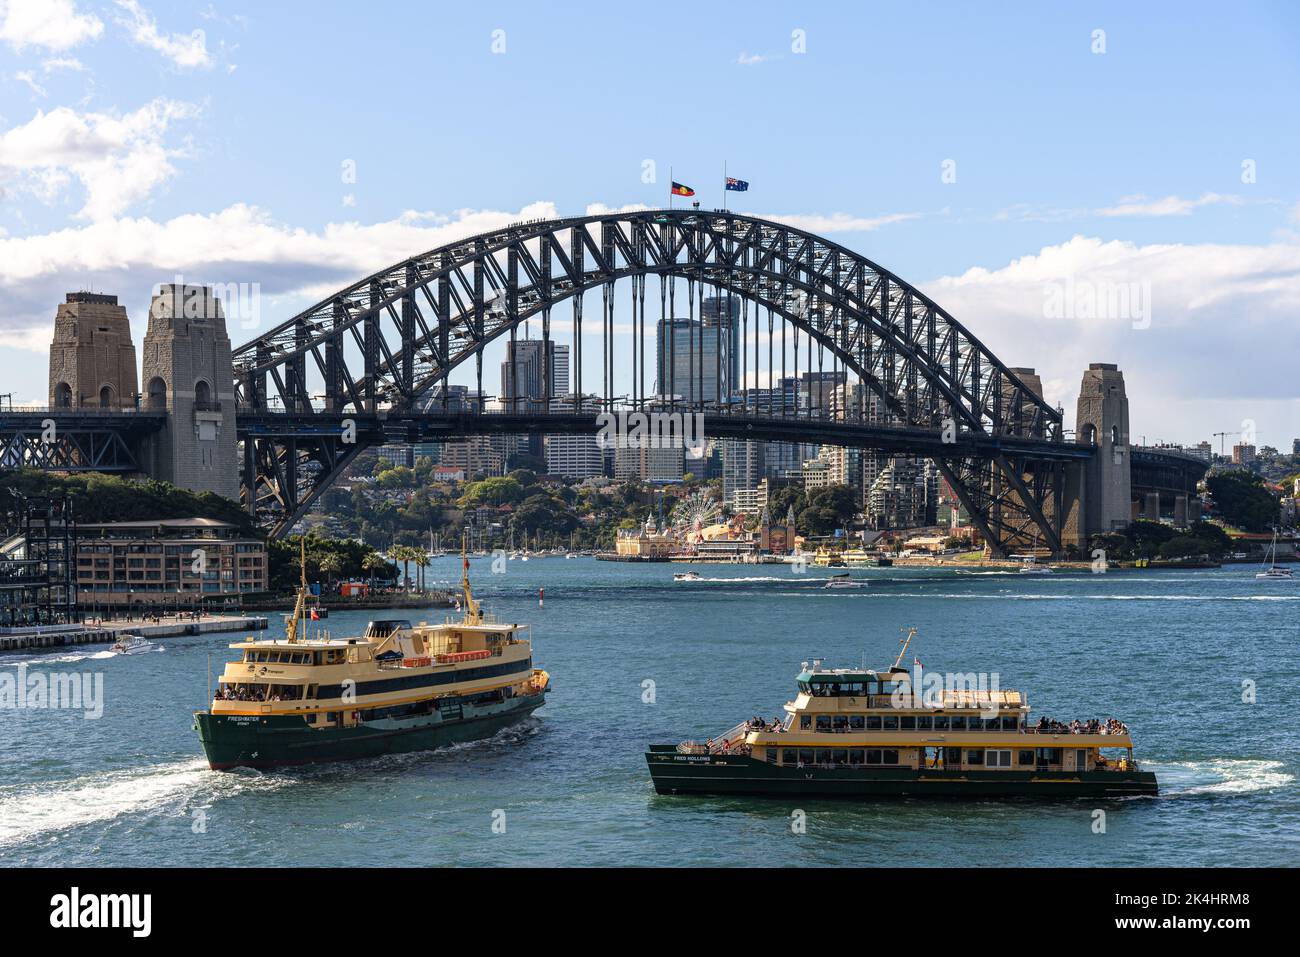 The Freshwater and Fred Hollows (Emerald Class) ferries approaching the Circular Quay Ferry Wharf with the Sydney Harbour Bridge in the background Stock Photo